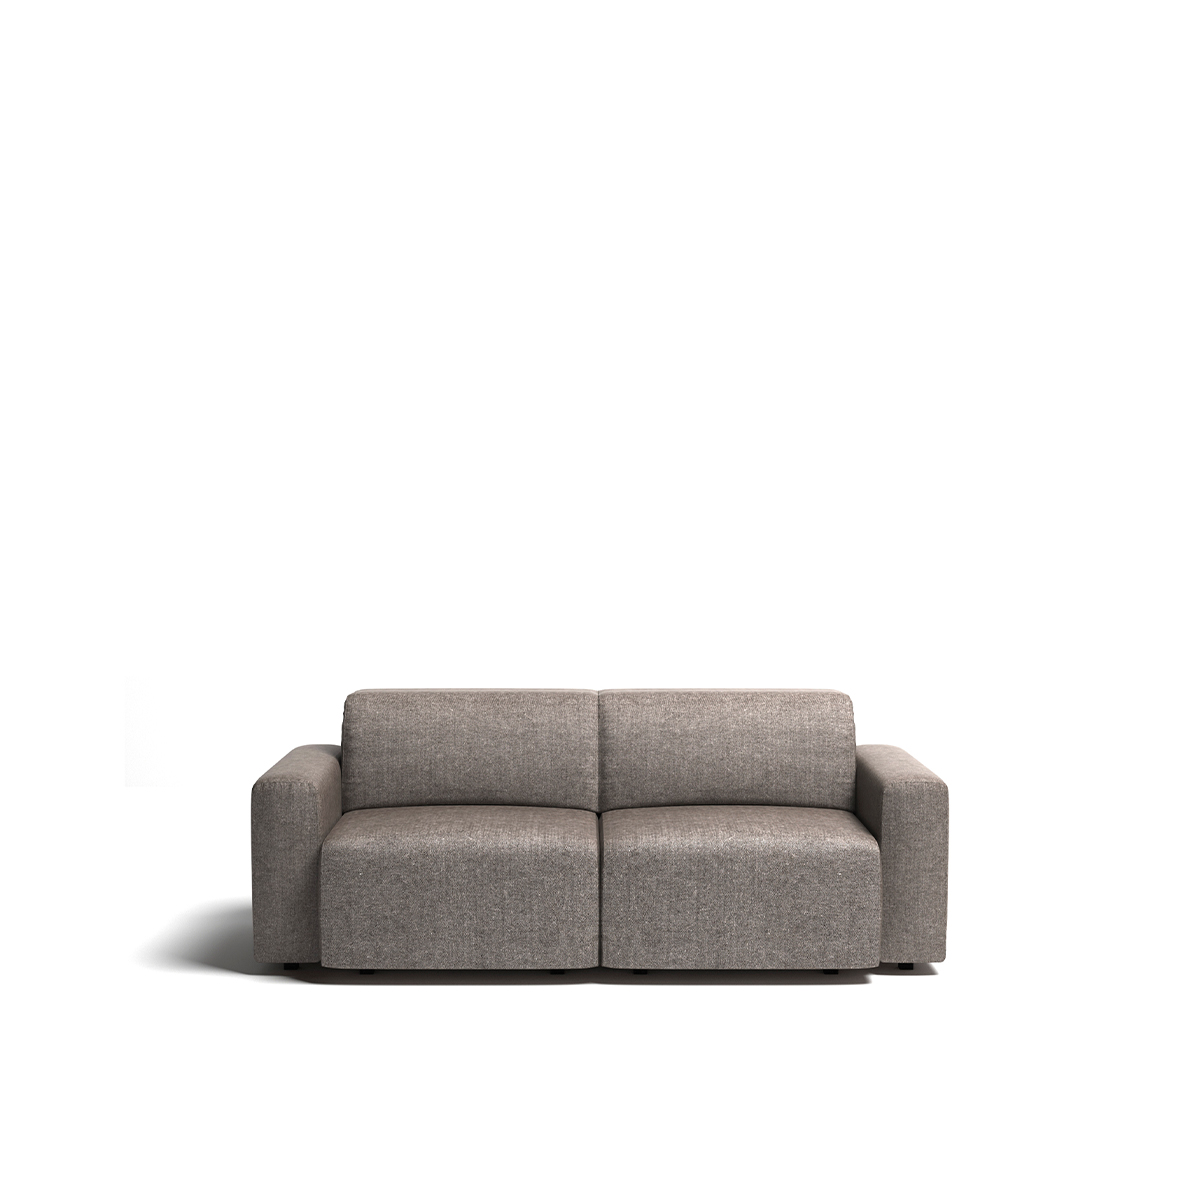 2-seater sofa Cosmopol Relax